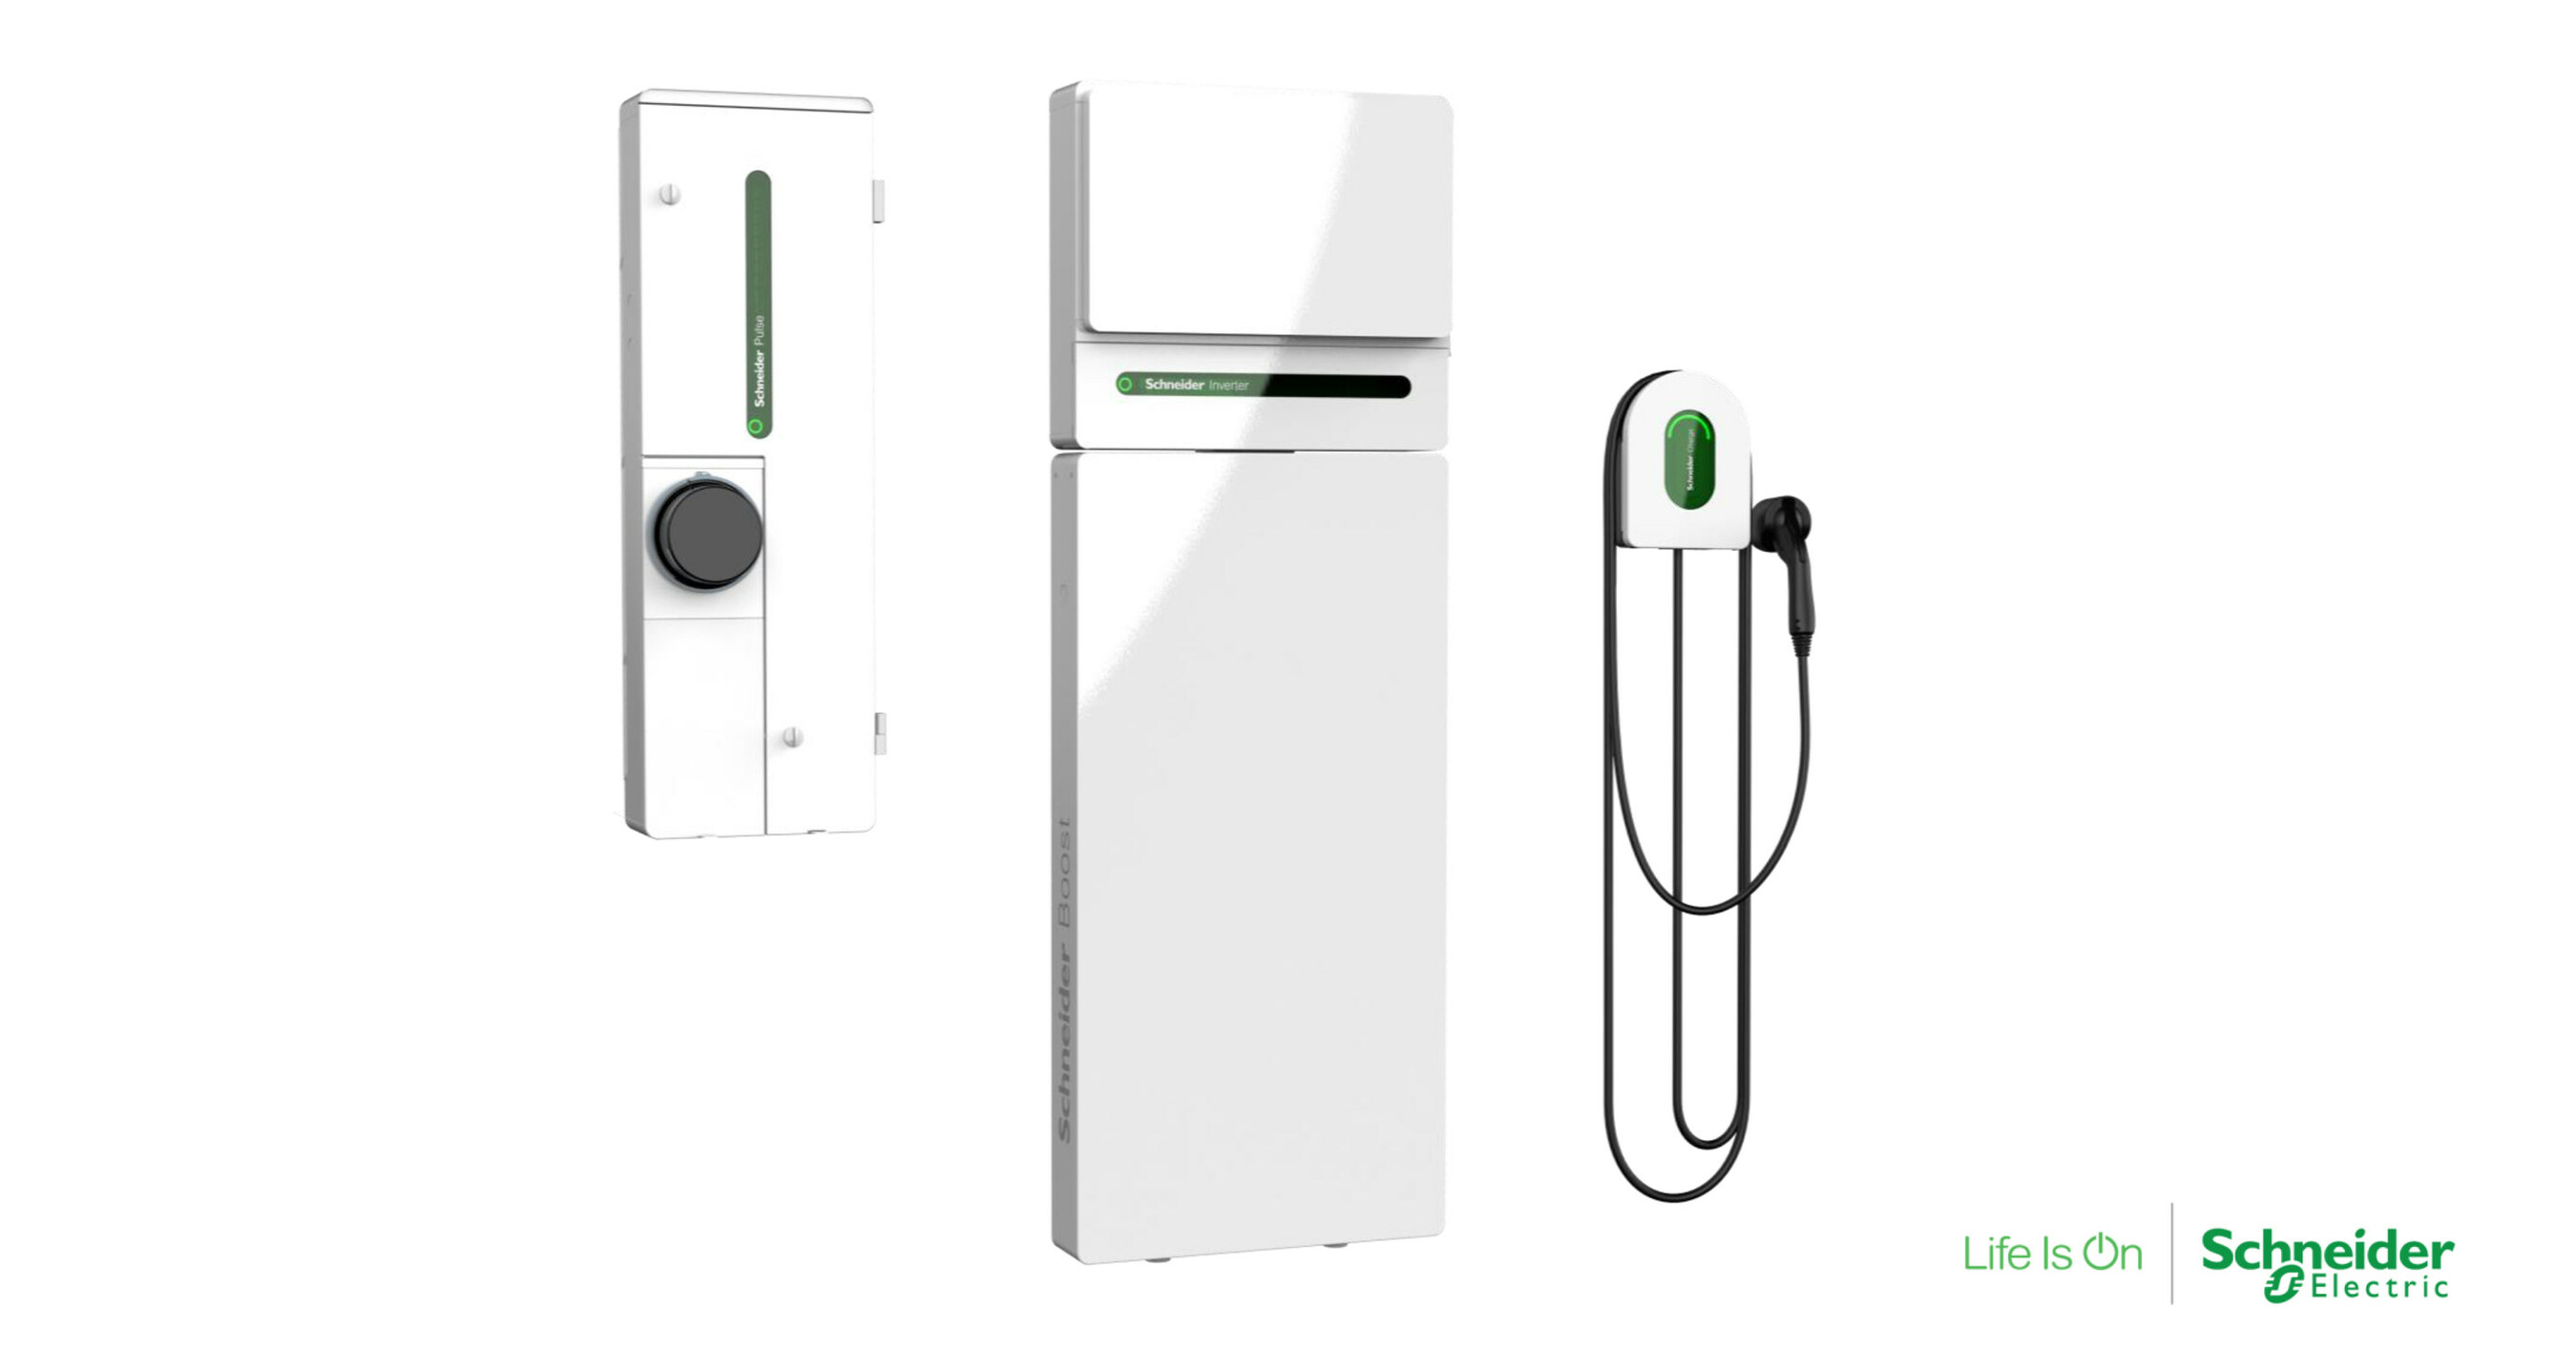 Schneider Electric Unveils First-of-its-Kind Simple, Smart